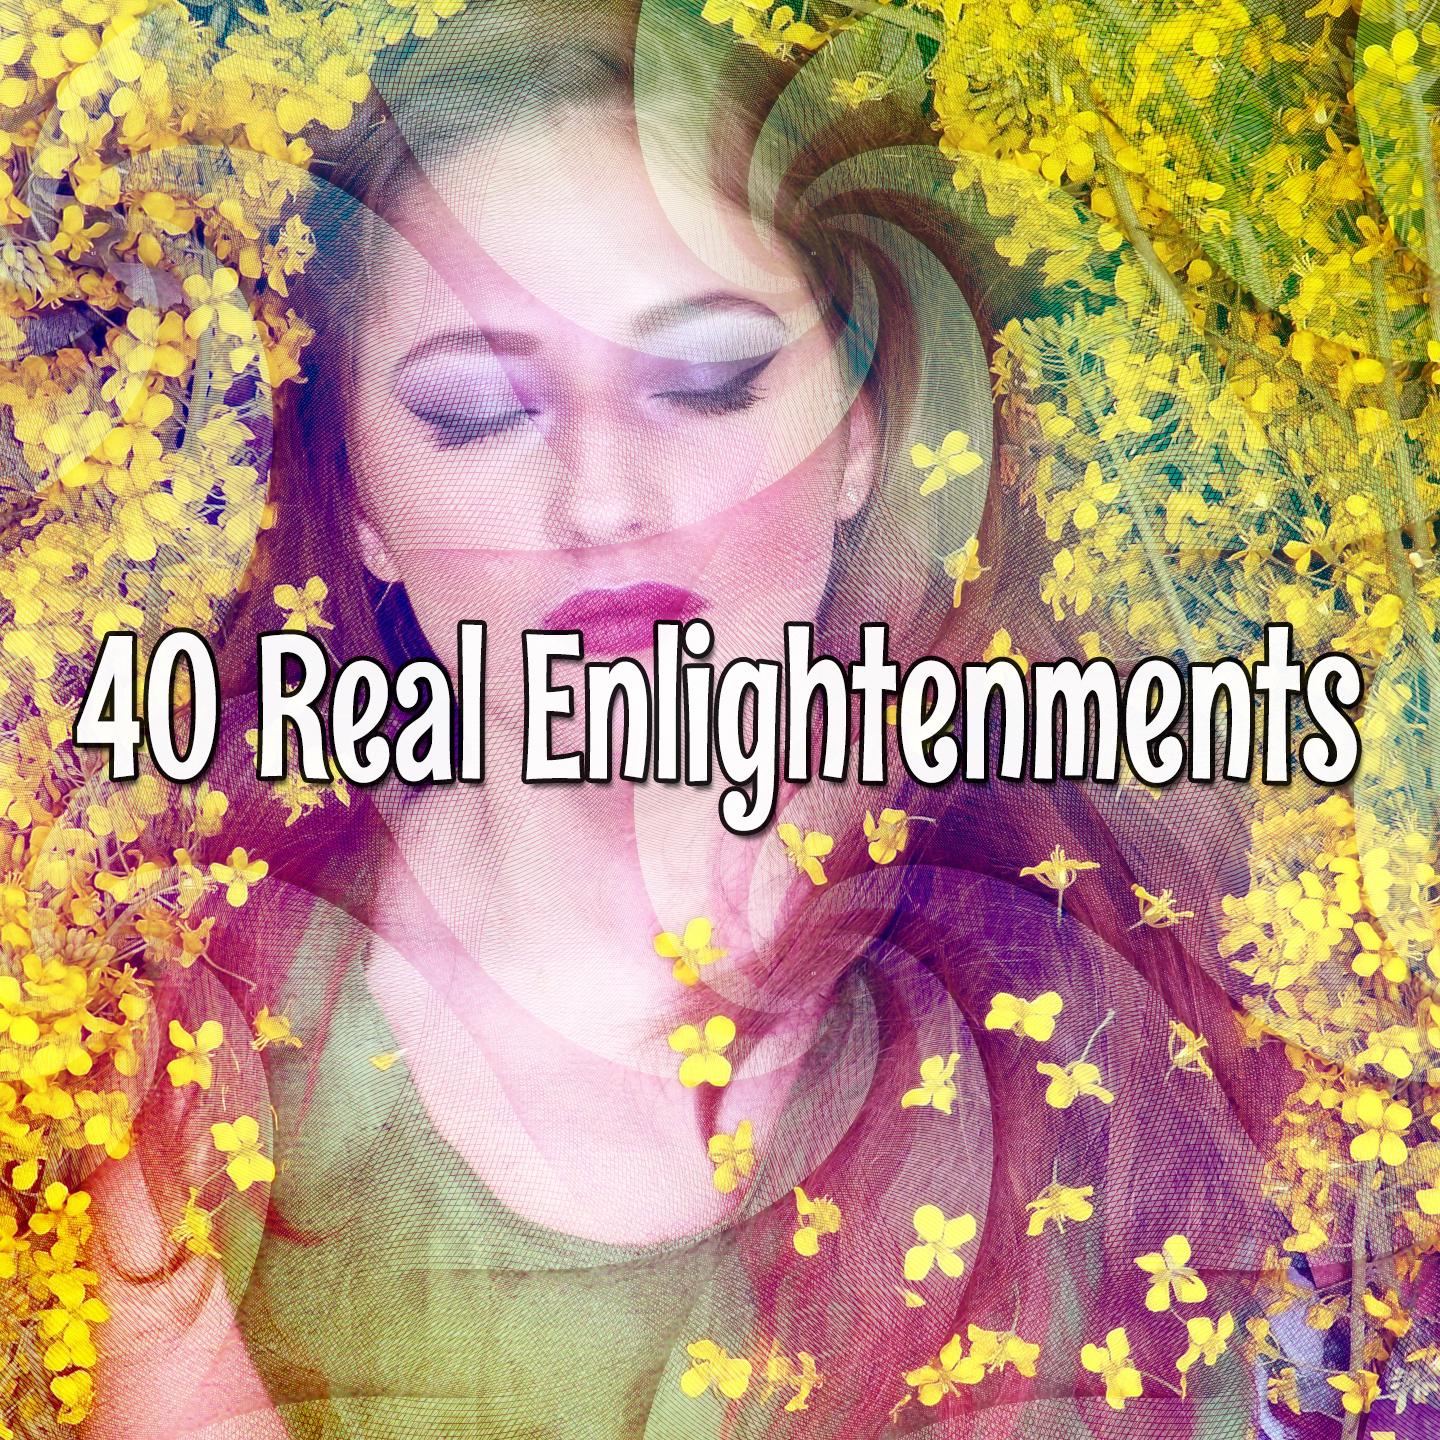 40 Real Enlightenments